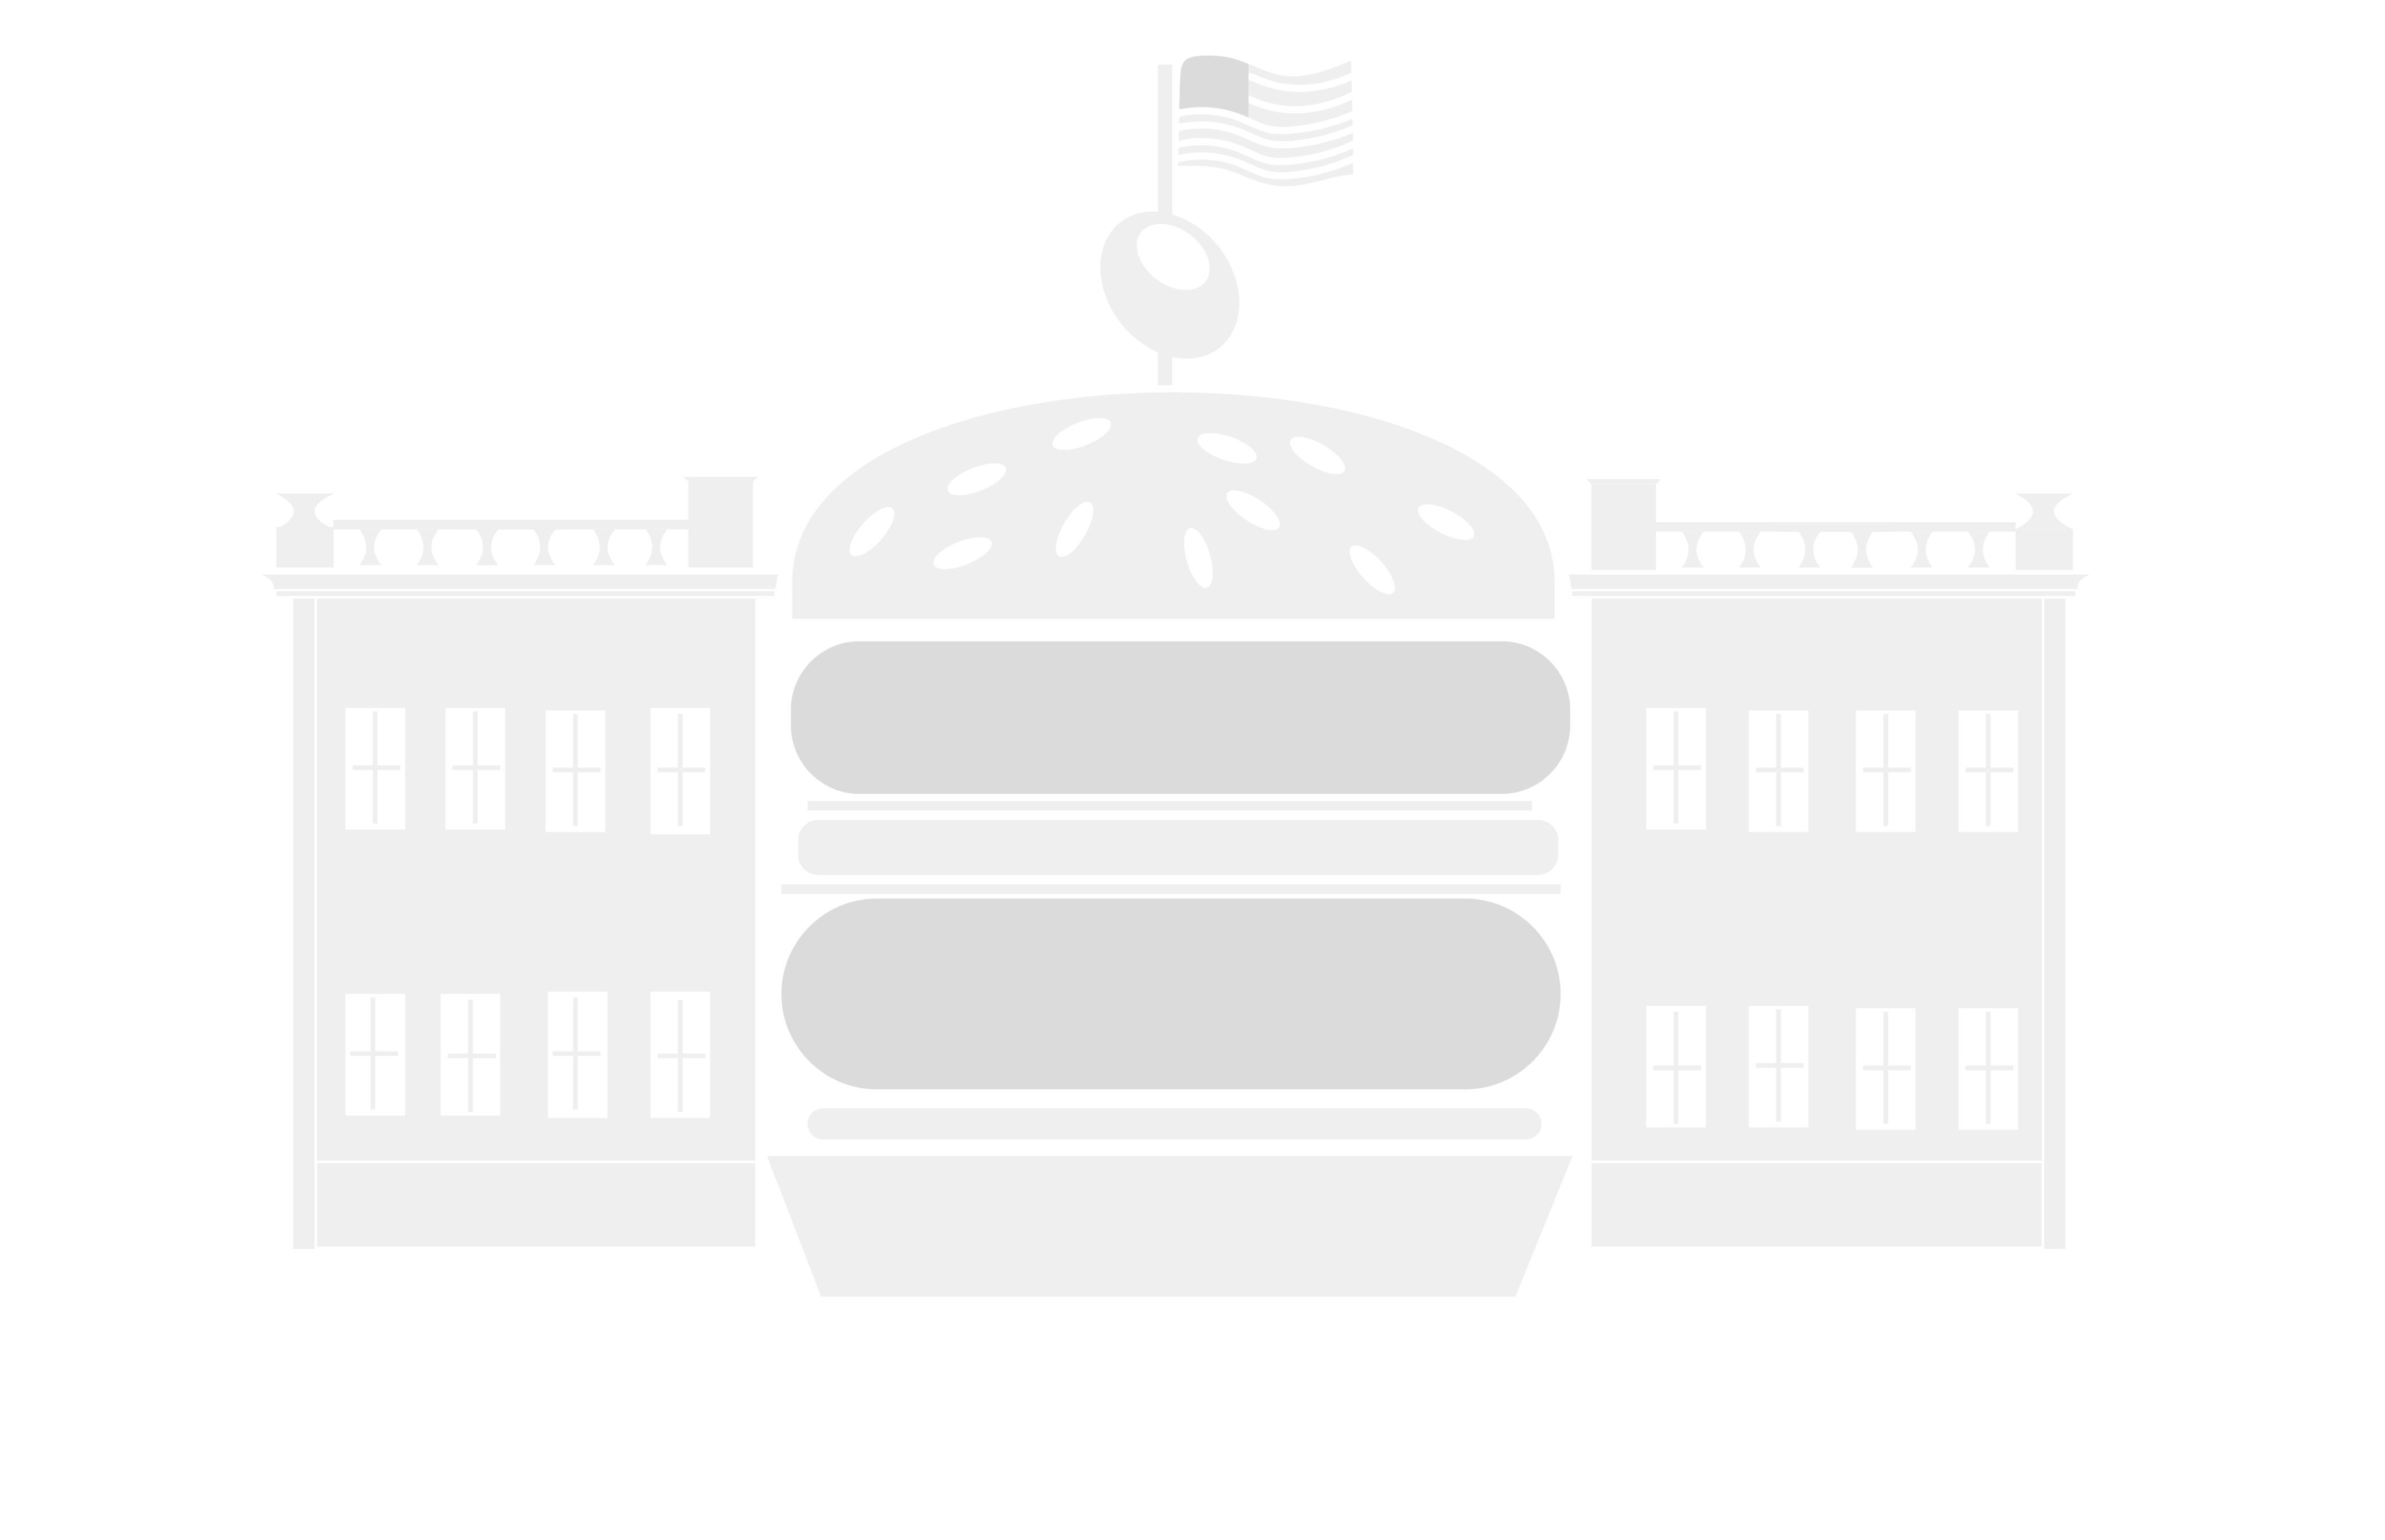 Graphic created to represent the White House with the a 'Big Mac' as the center.